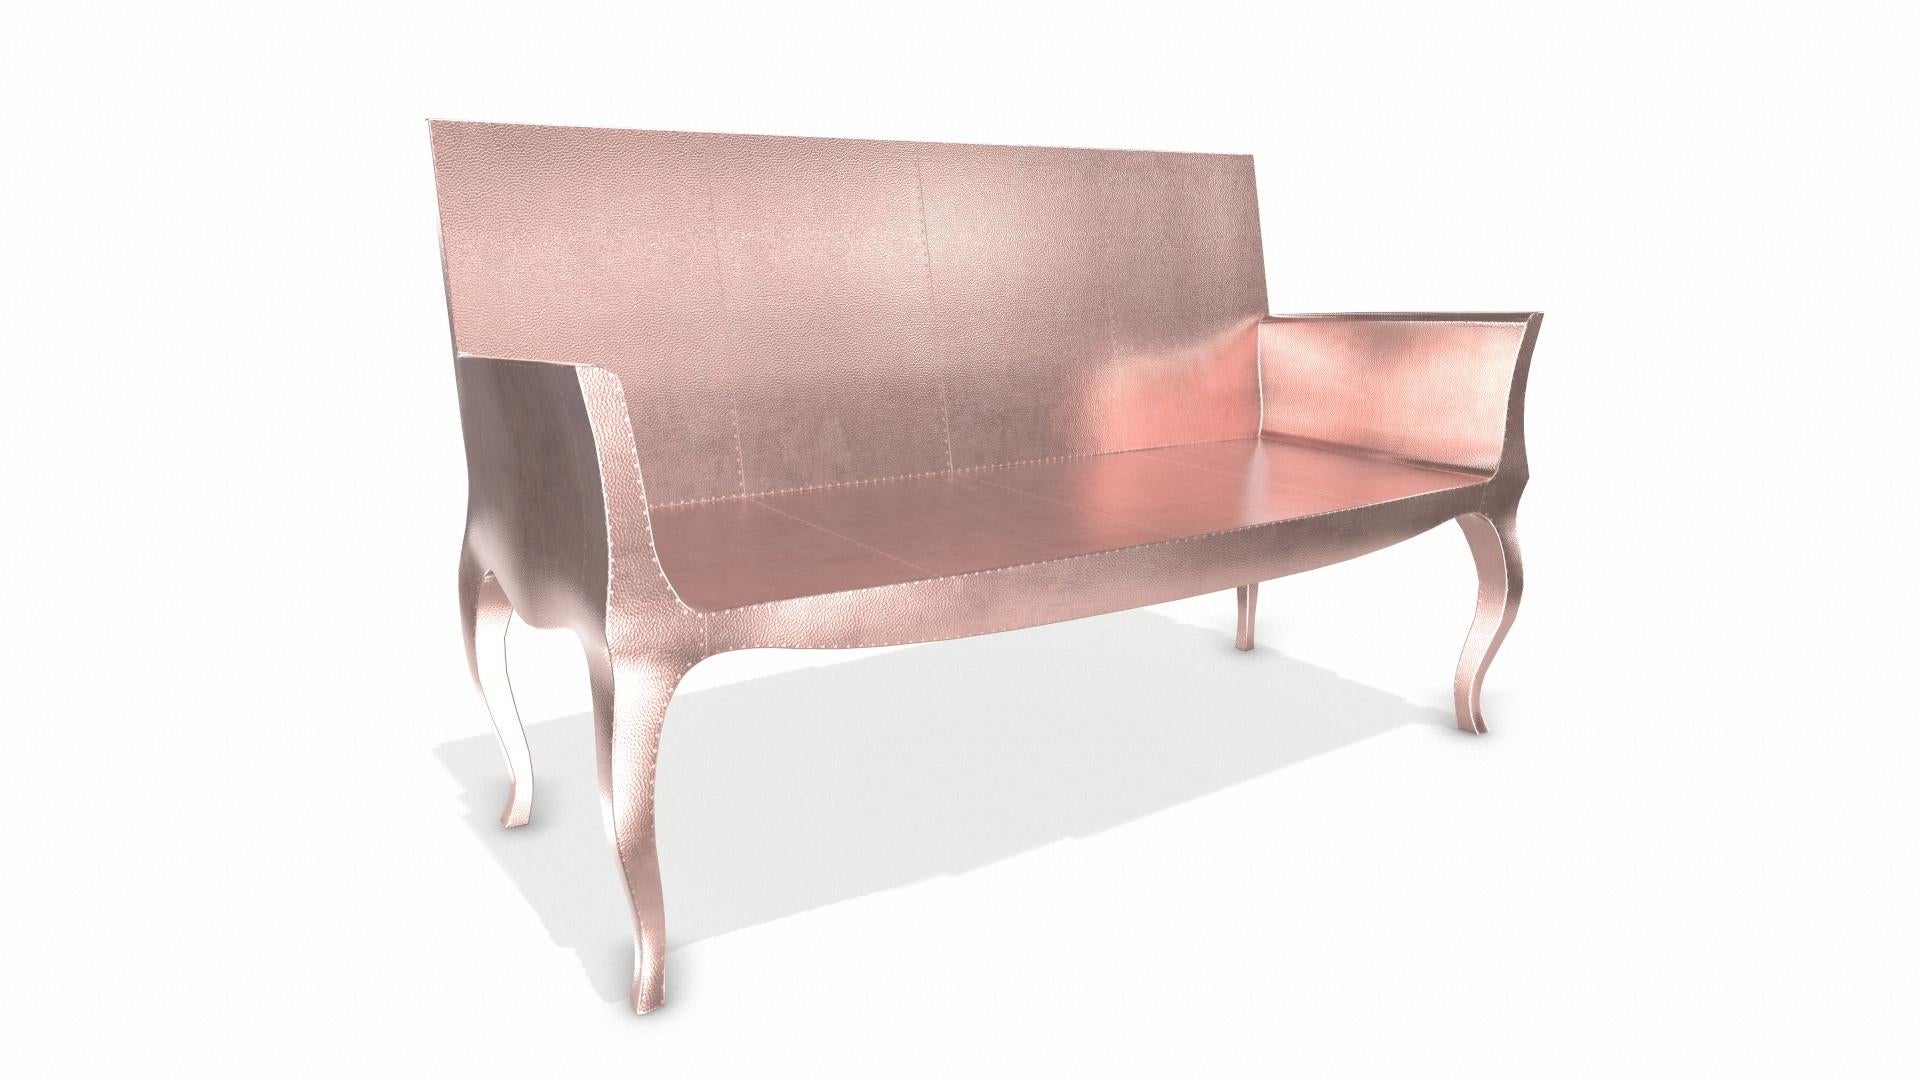 Contemporary Louise Settee Art Deco Living Room Sets in Mid. Hammered Copper by Paul Mathieu For Sale